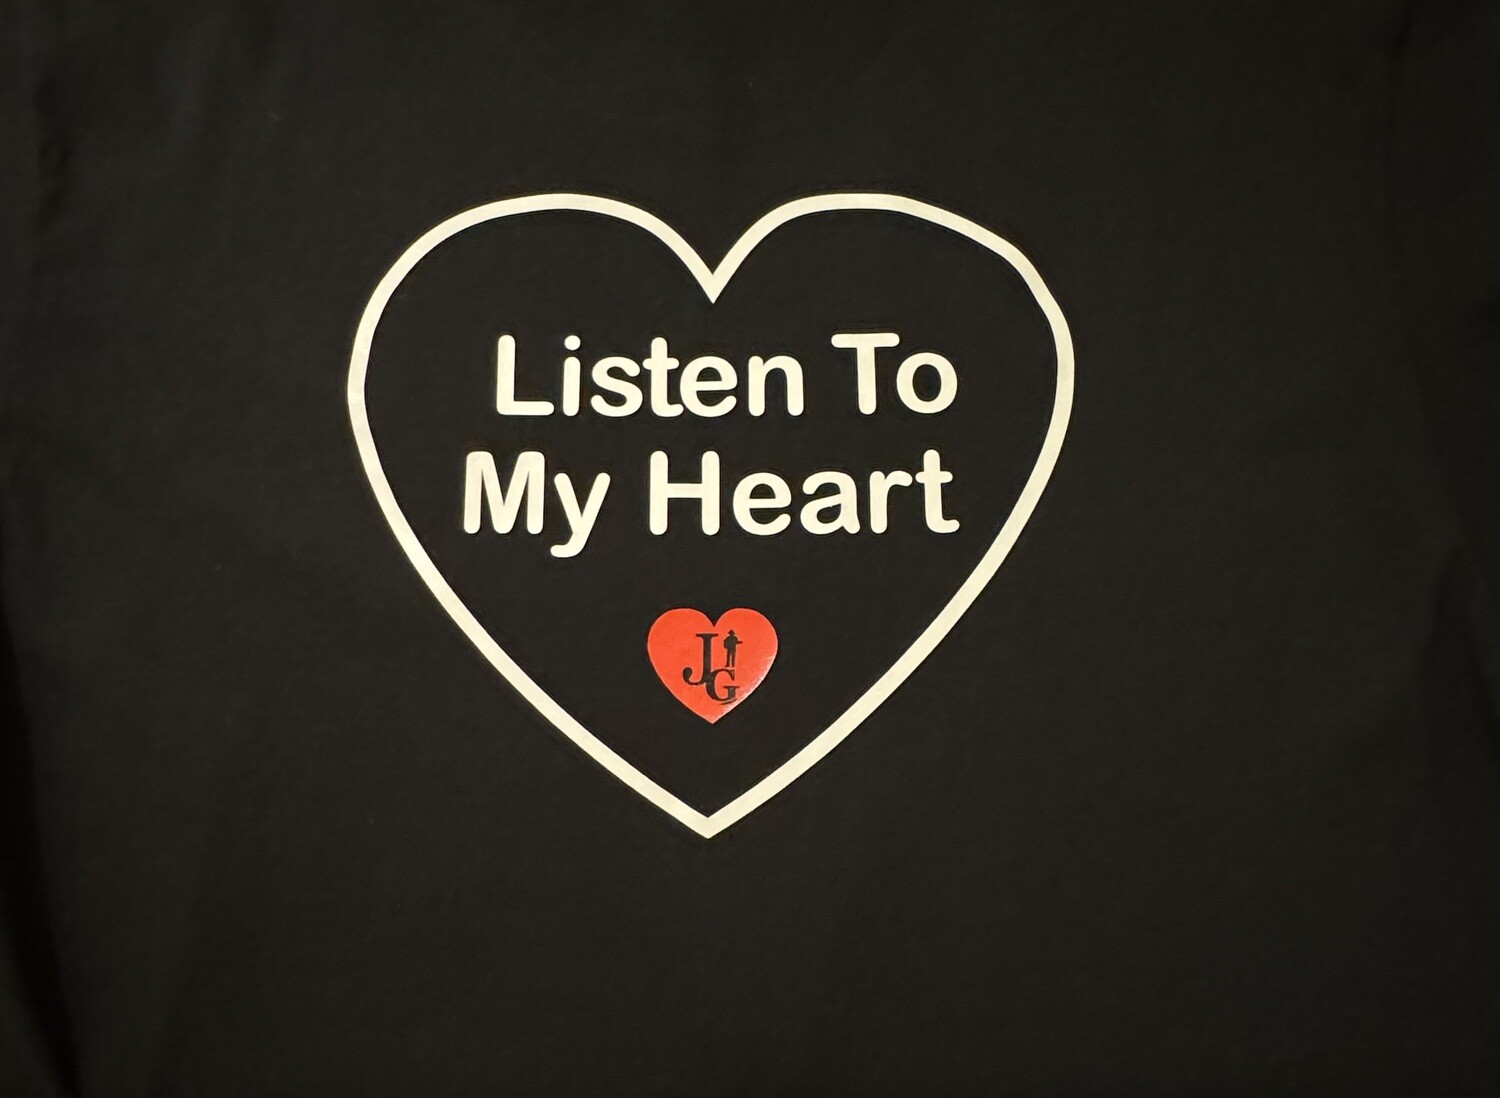 *****NEW***** Special Edition Listen To My Heart Printed T-Shirt